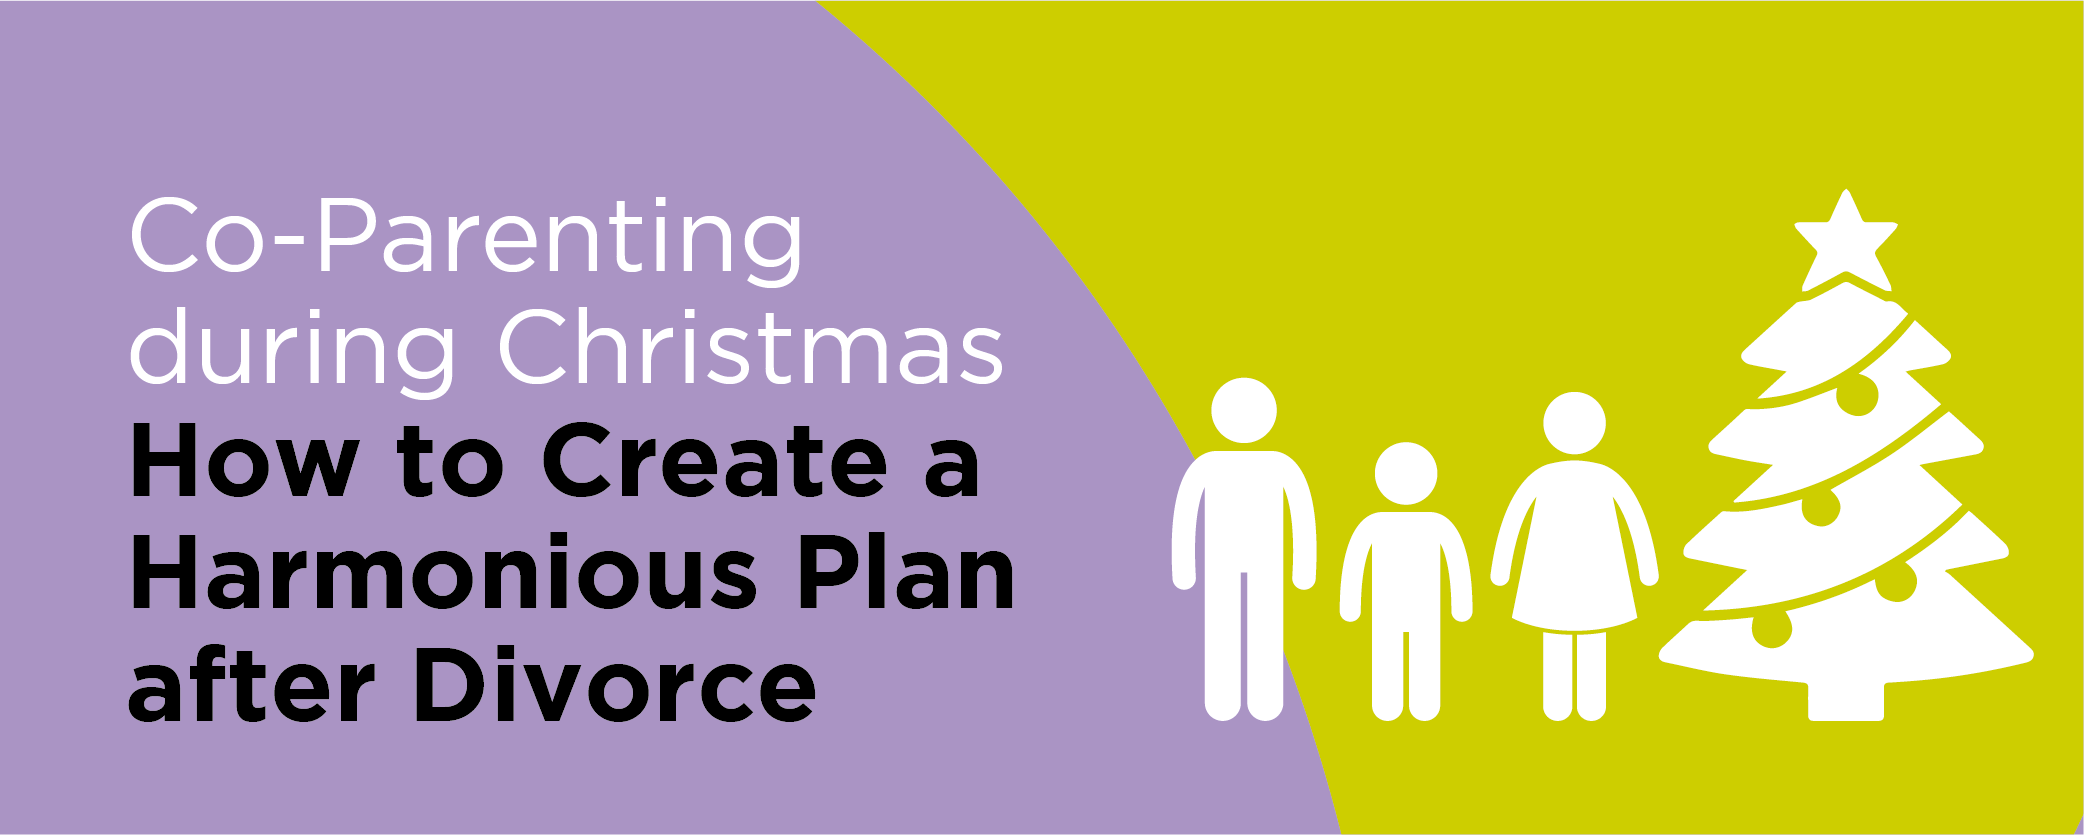 Co-Parenting during Christmas: How to Create a Harmonious Plan after Divorce